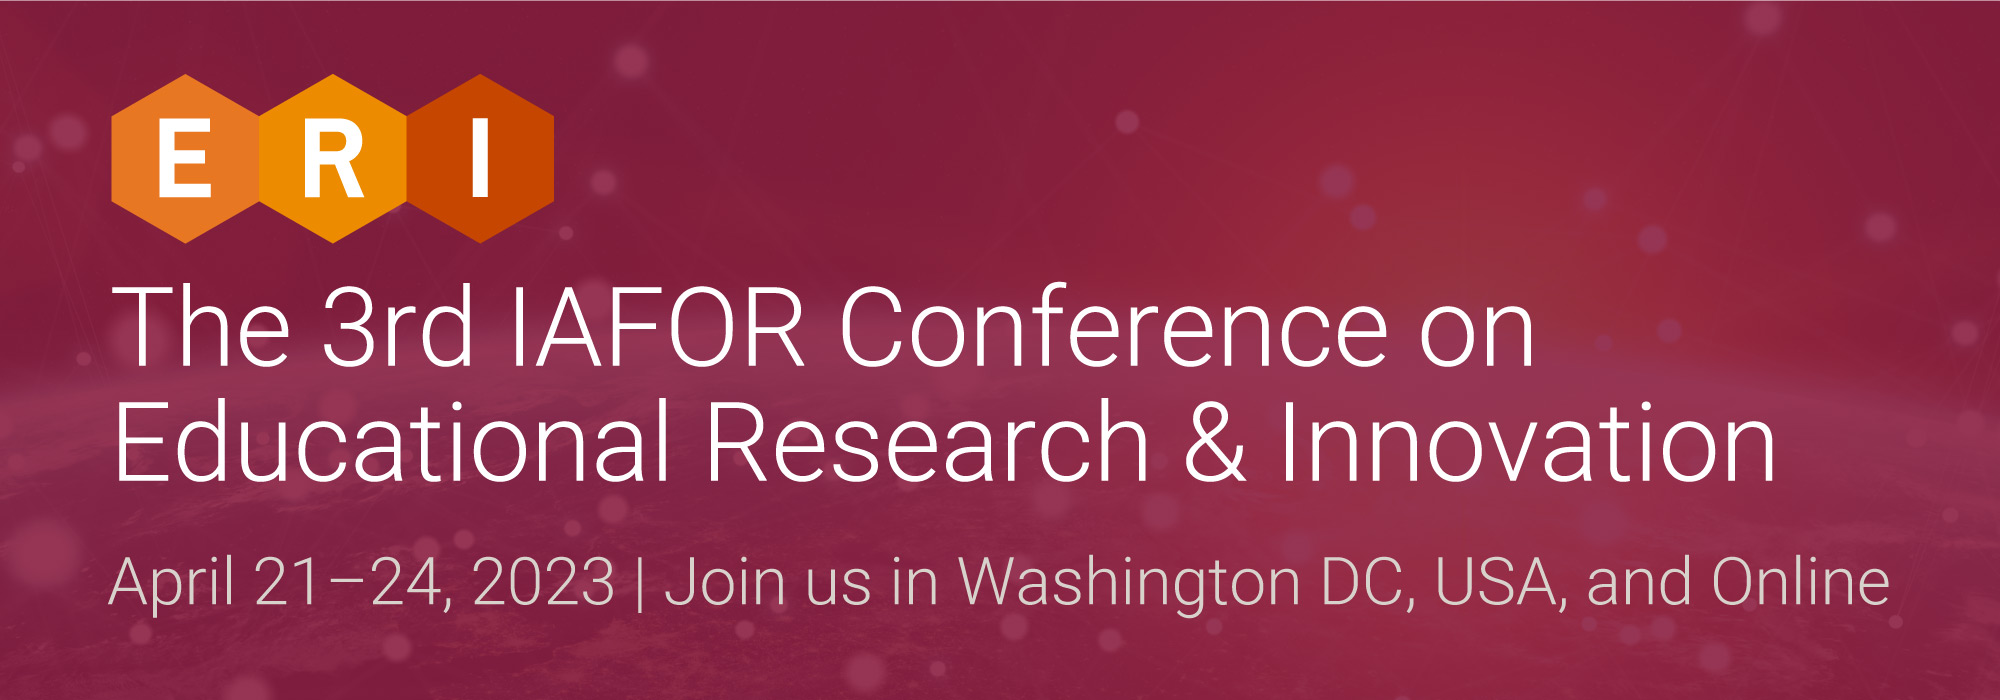 The IAFOR Conference on Educational Research & Innovation (ERI2023) Logo